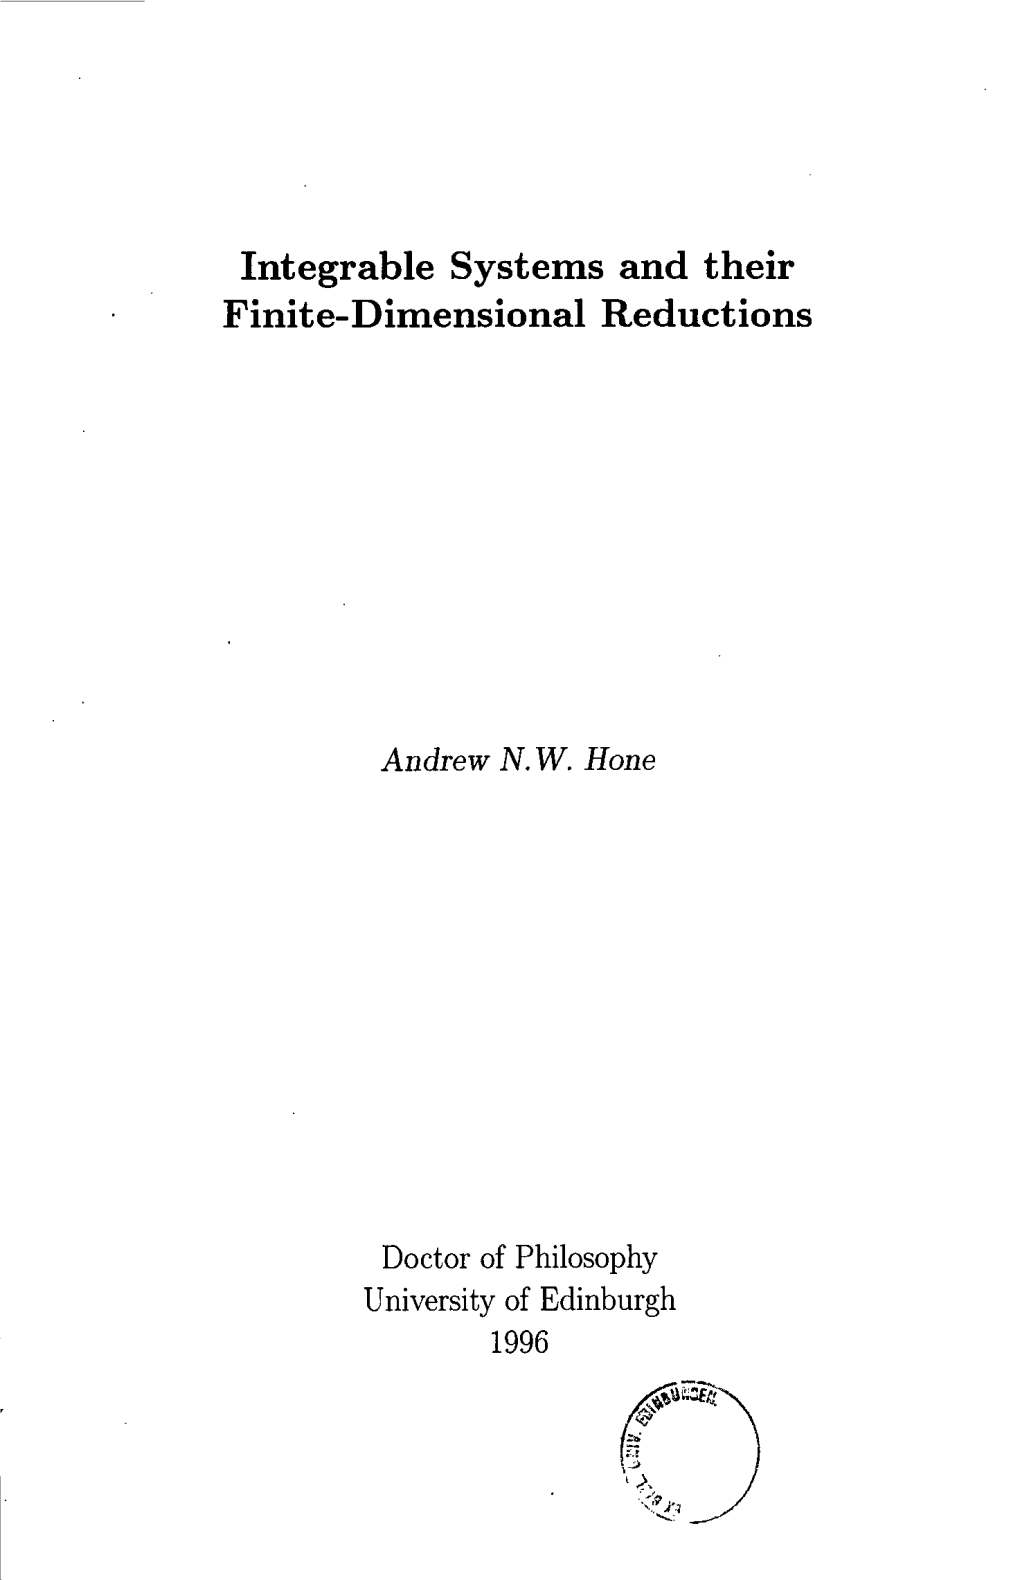 Integrable Systems and Their Finite-Dimensional Reductions